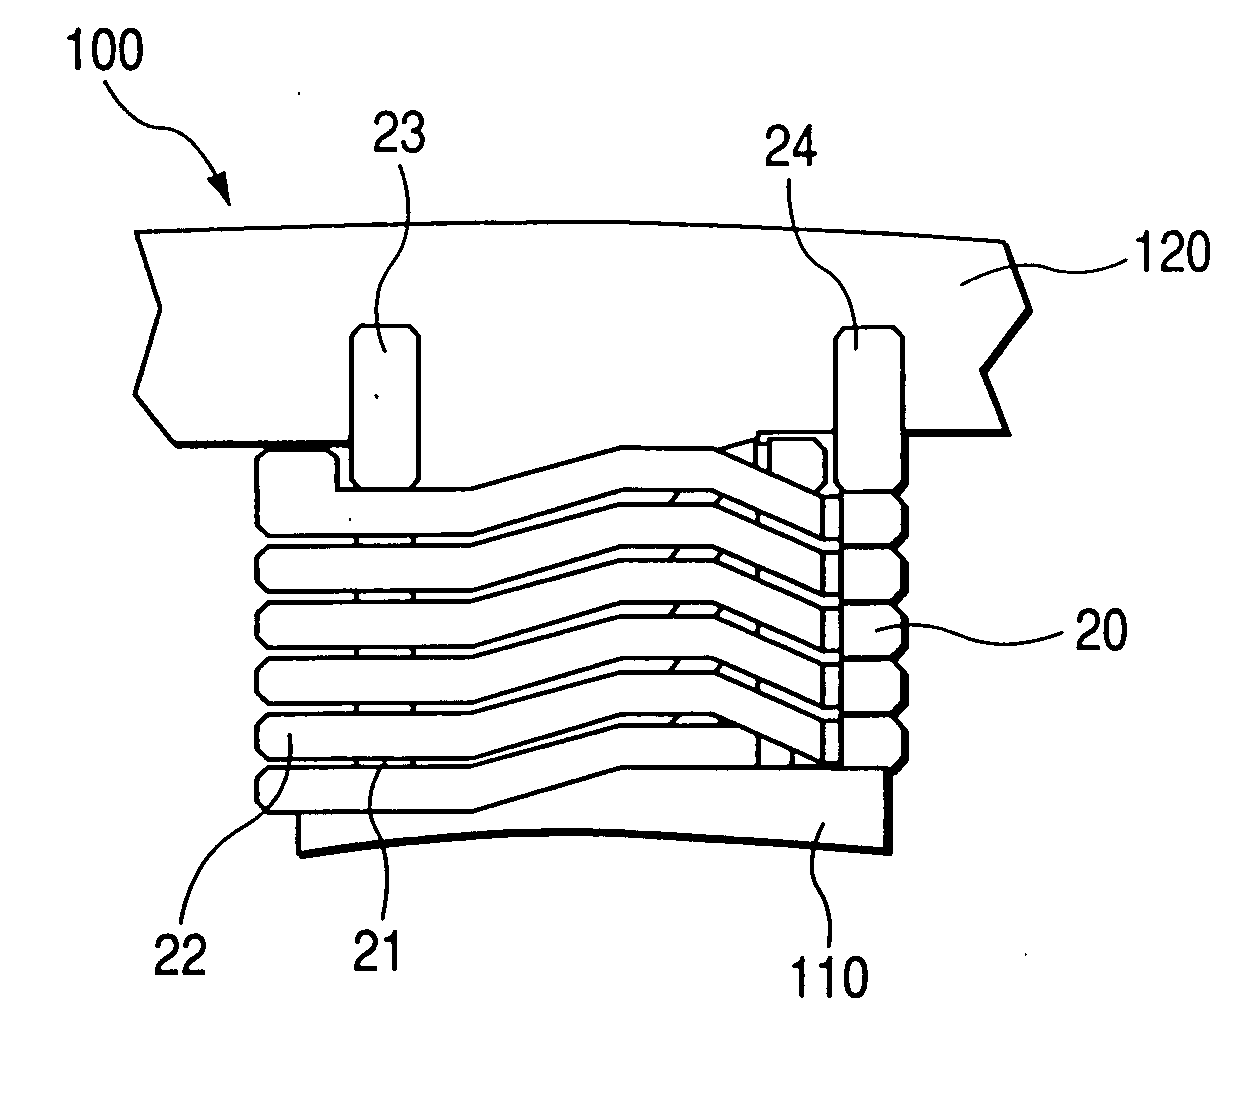 Concentrated winding stator coil for an electric rotary machine